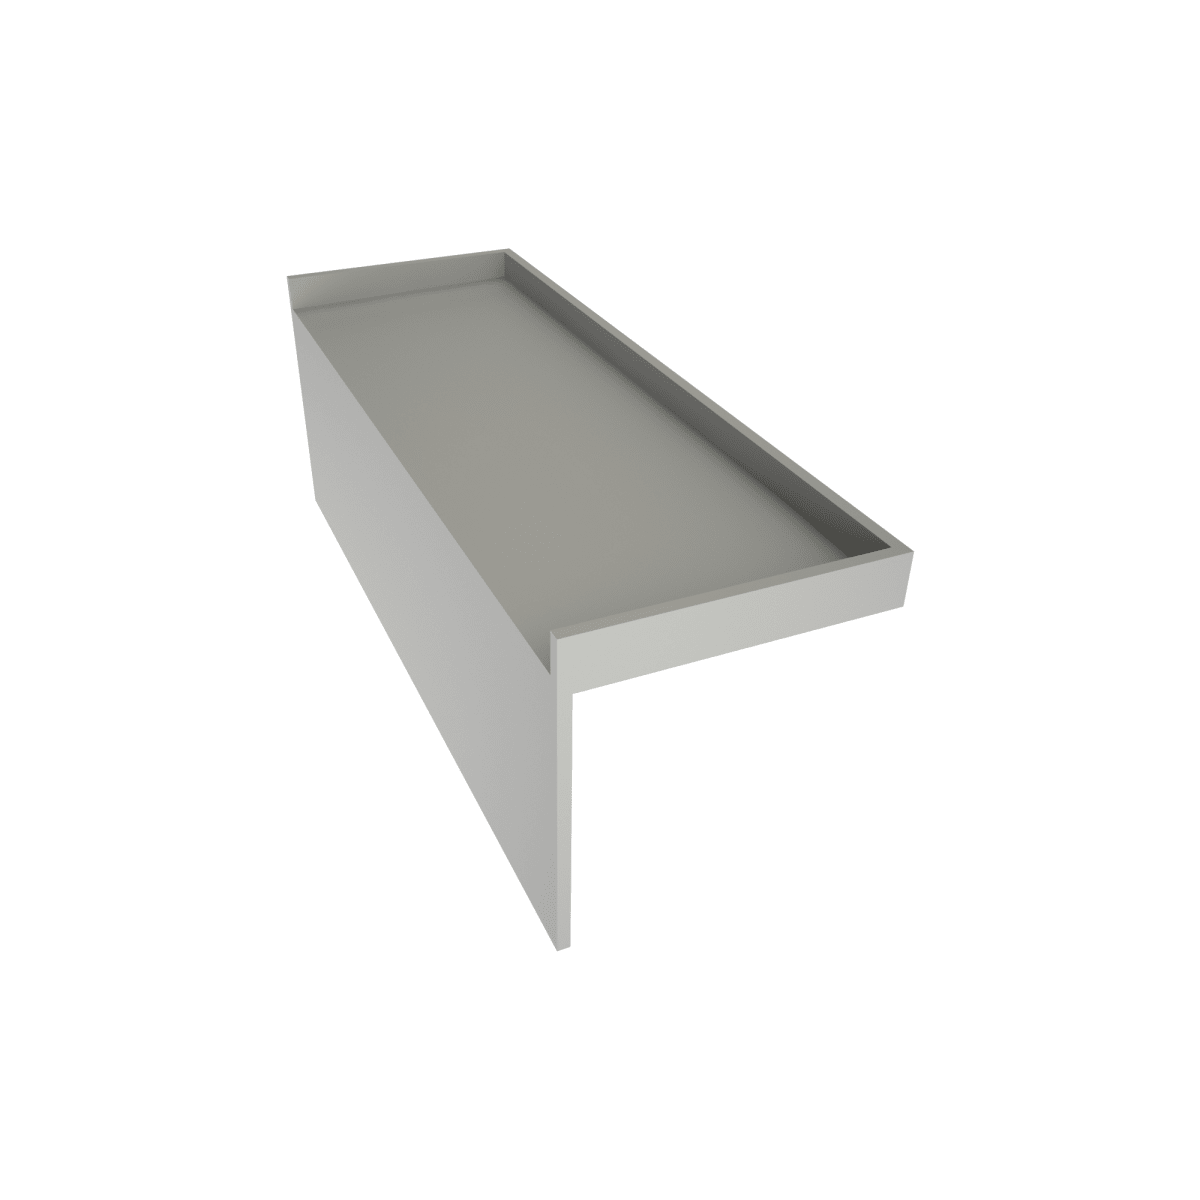 Tile Redi USA Redi Bench RB3012-KIT  Tileable Shower Seat Flashing & Epoxy Included 26 Inches x 12 Inches Fits 30 Inch Bases Grey Polyurethane